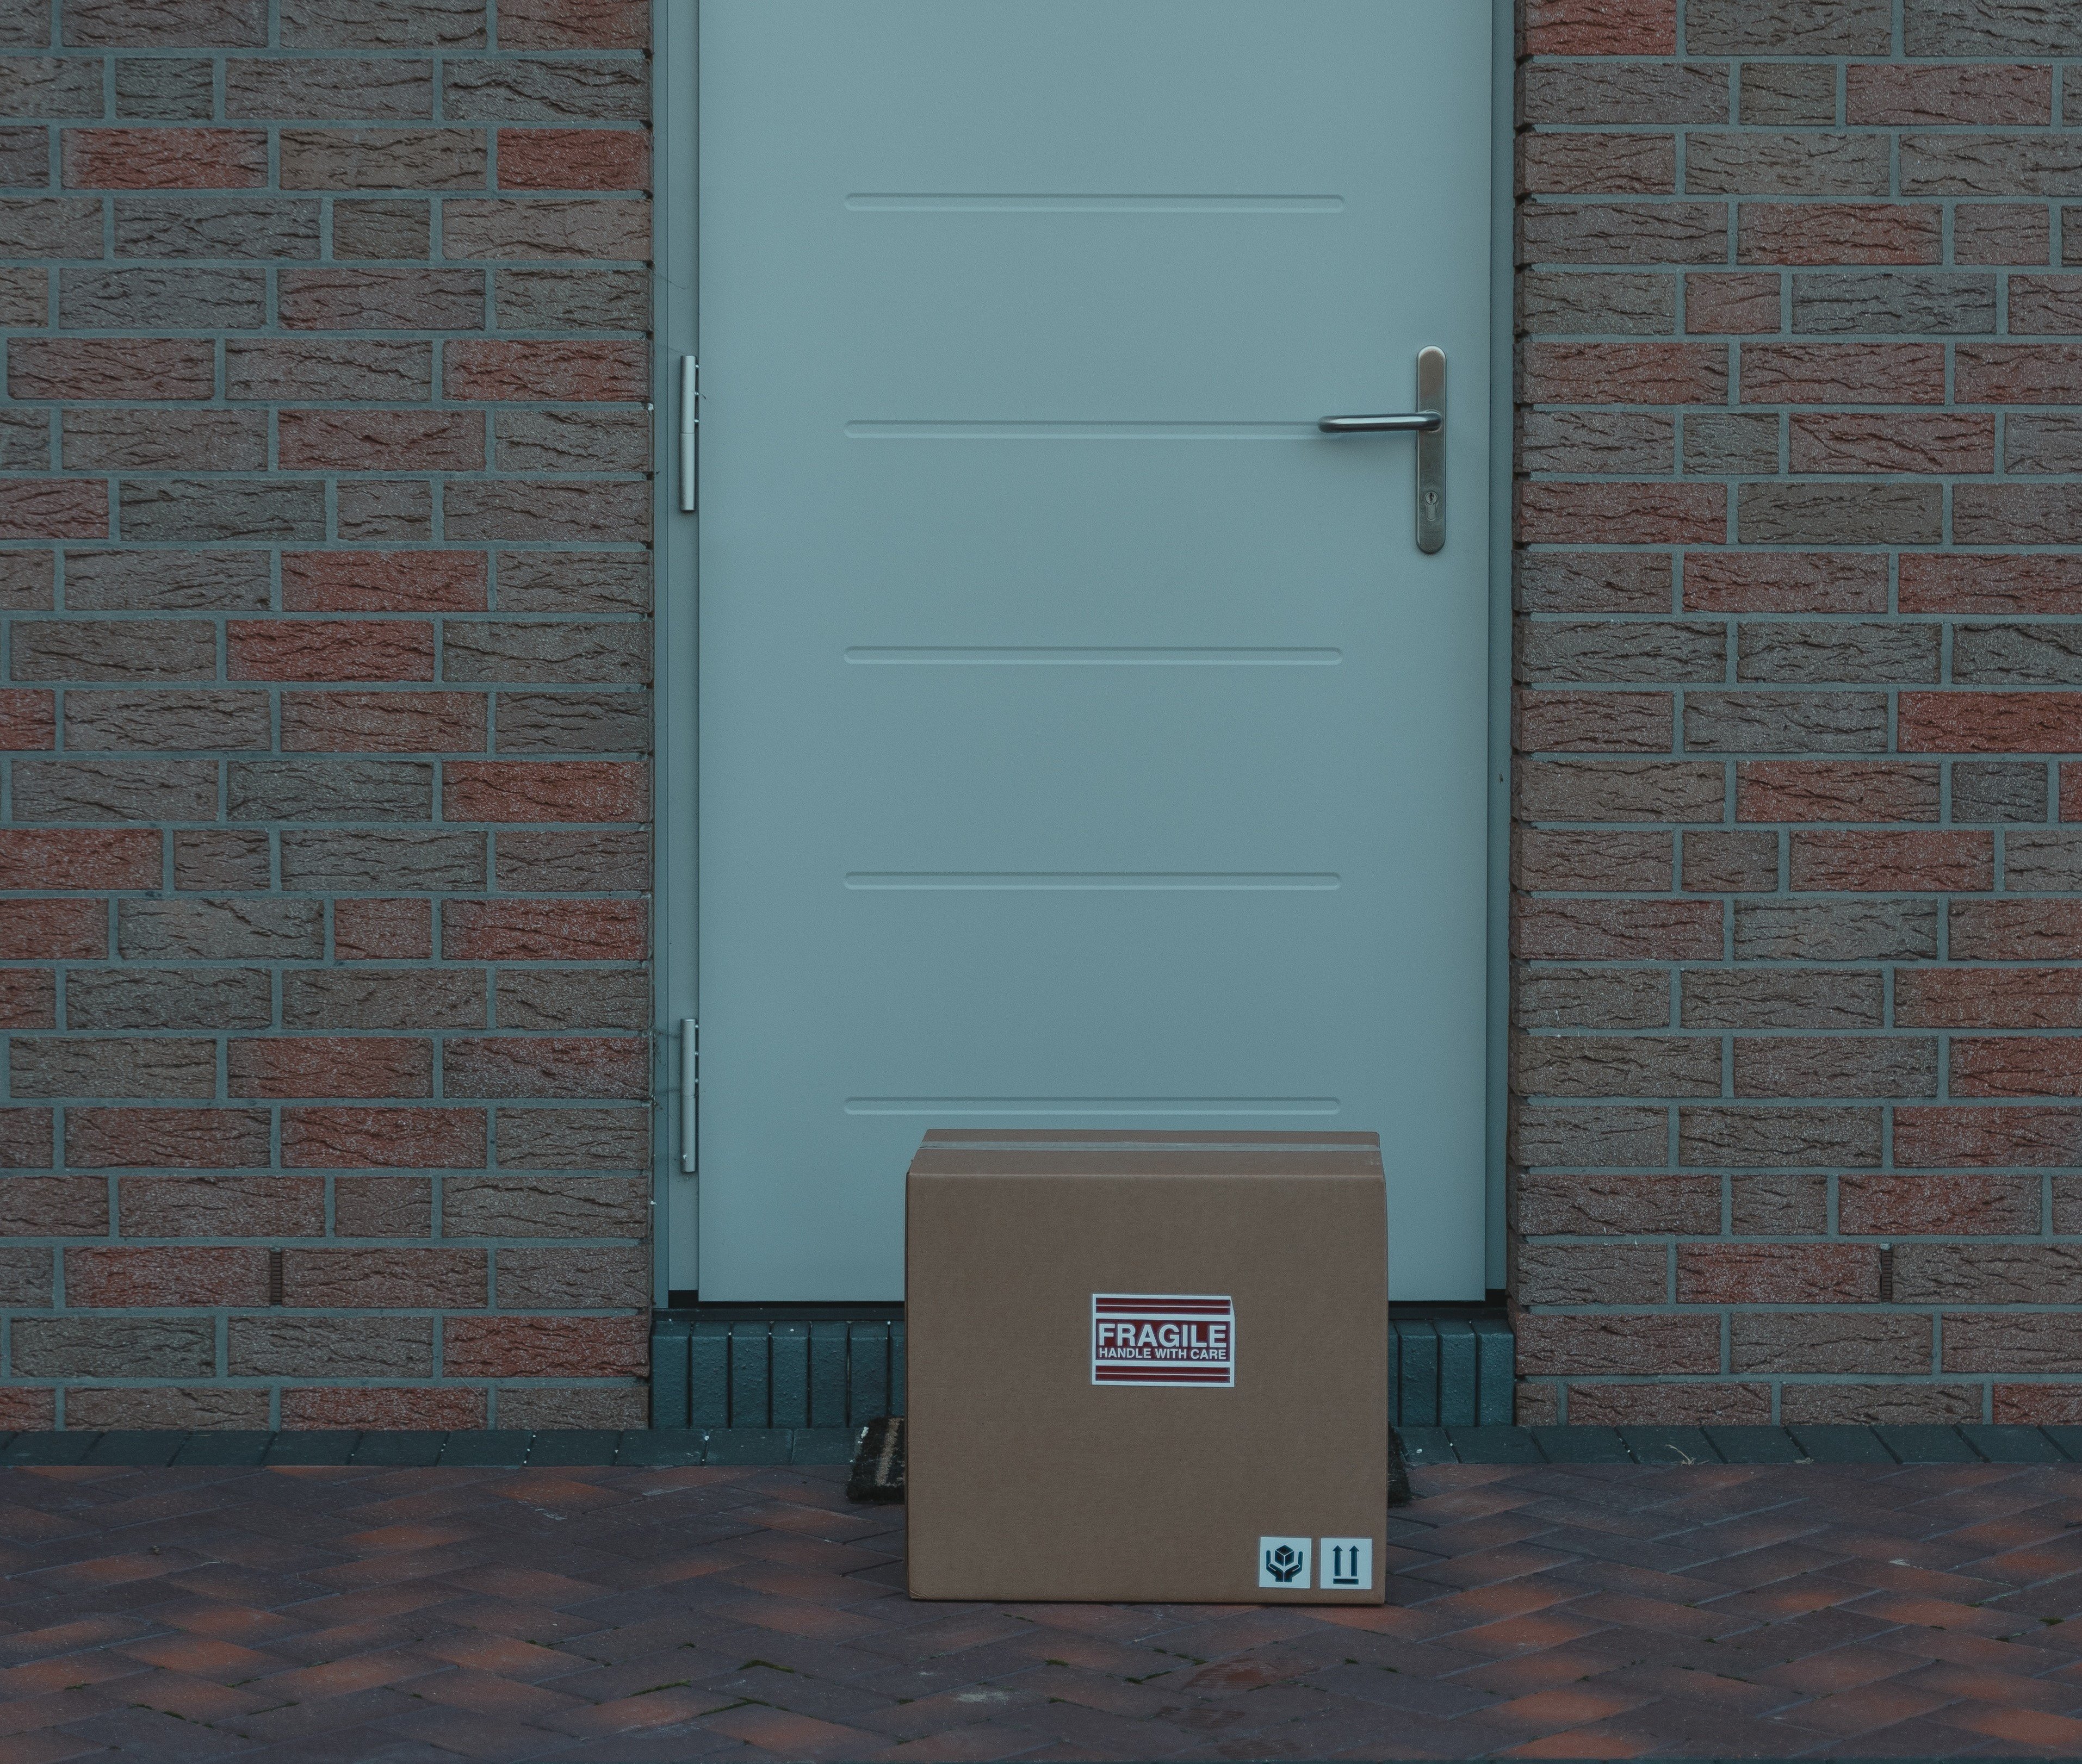 One evening, Dylan found a mysterious cardboard box at his doorstep. | Source: Pexels